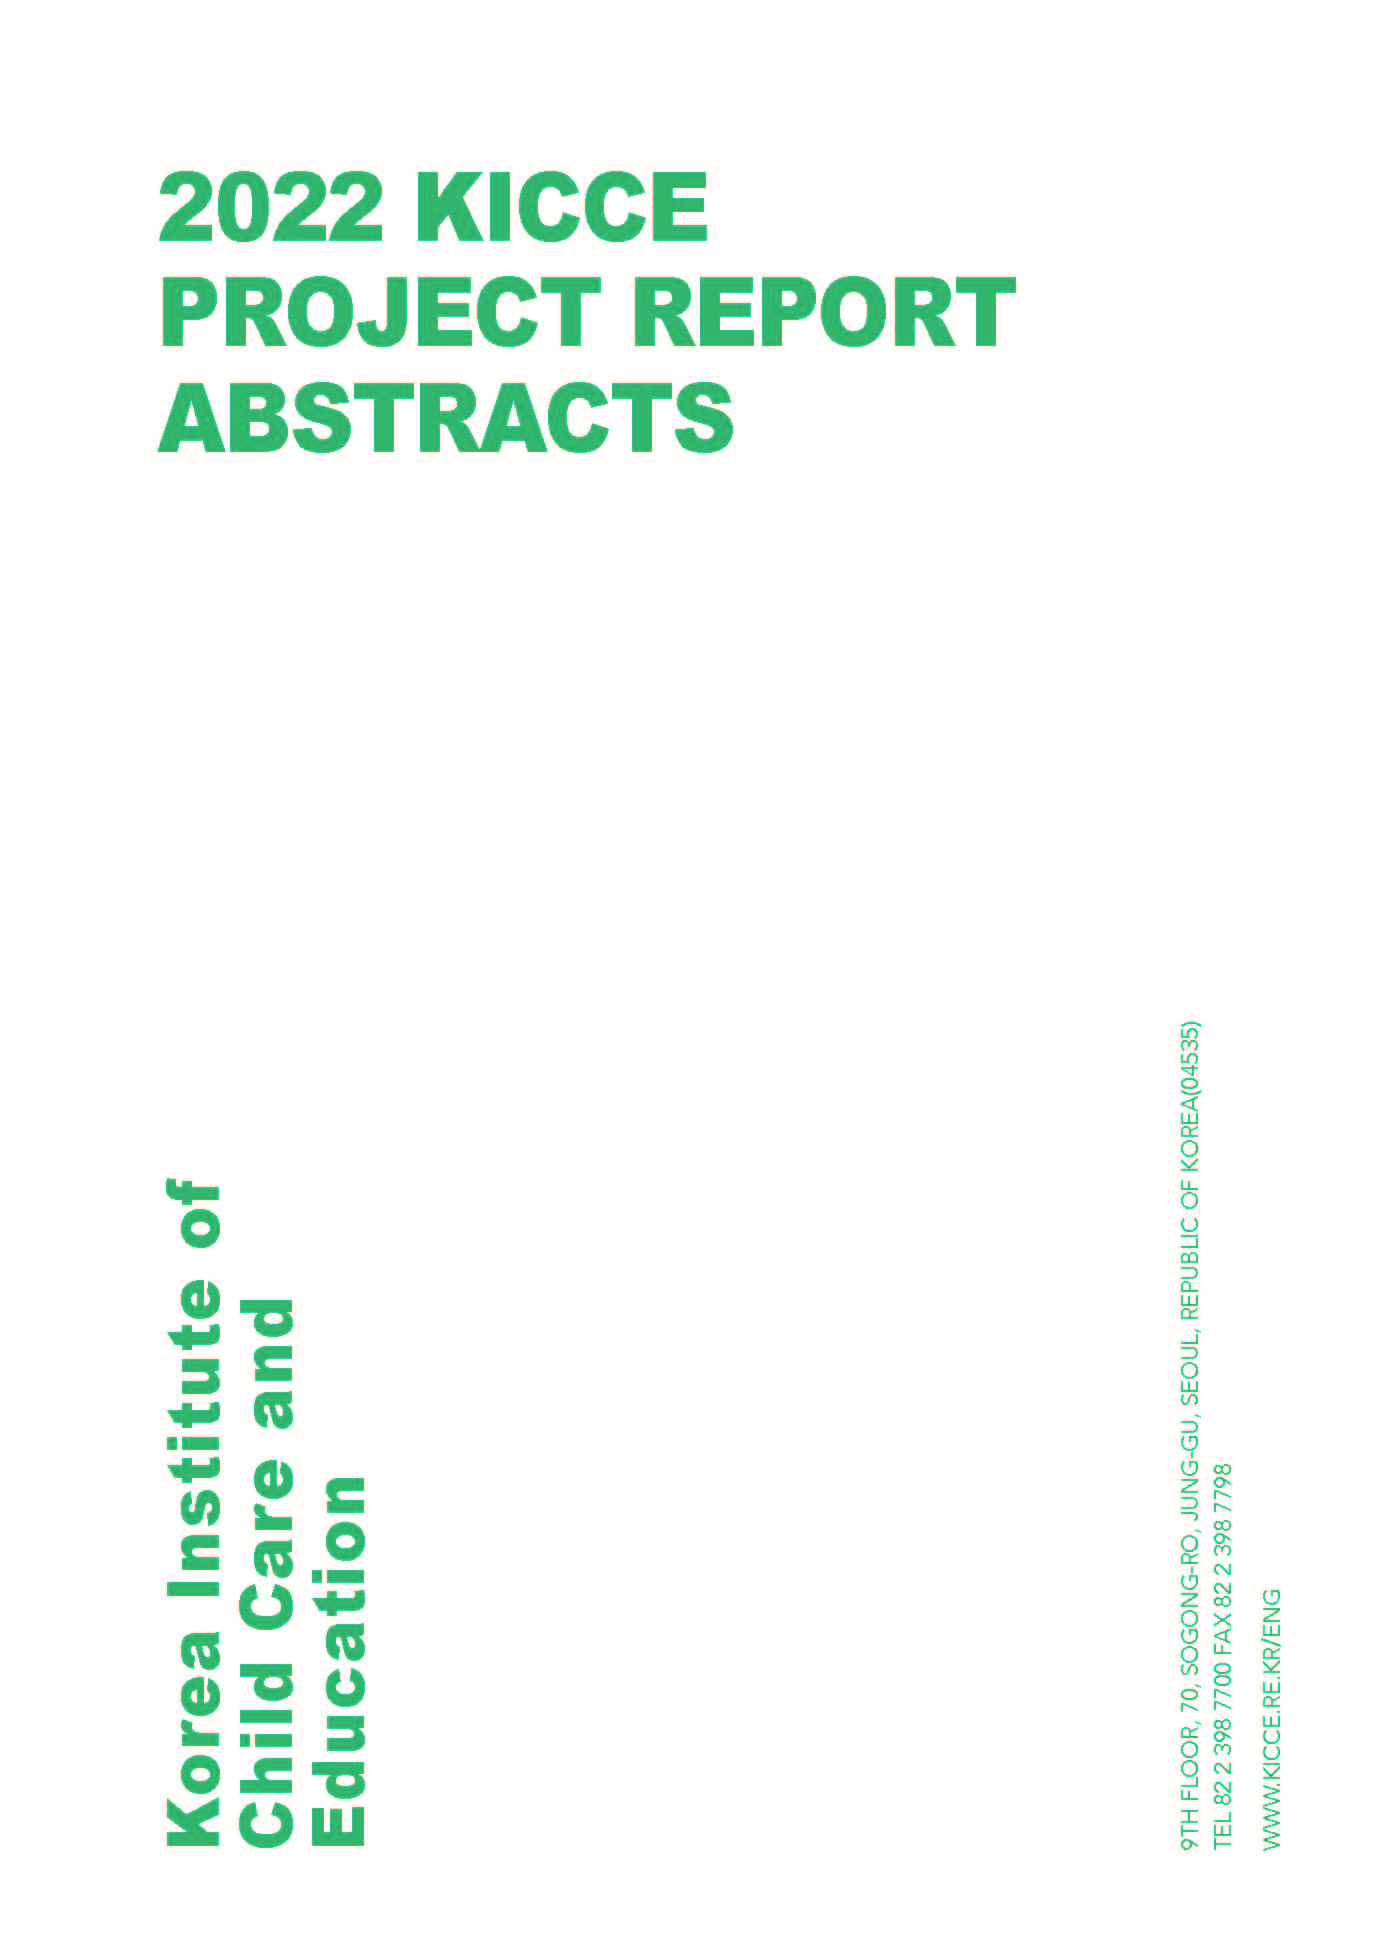 2022 KICCE Project Report Abstracts 표지 이미지 입니다.